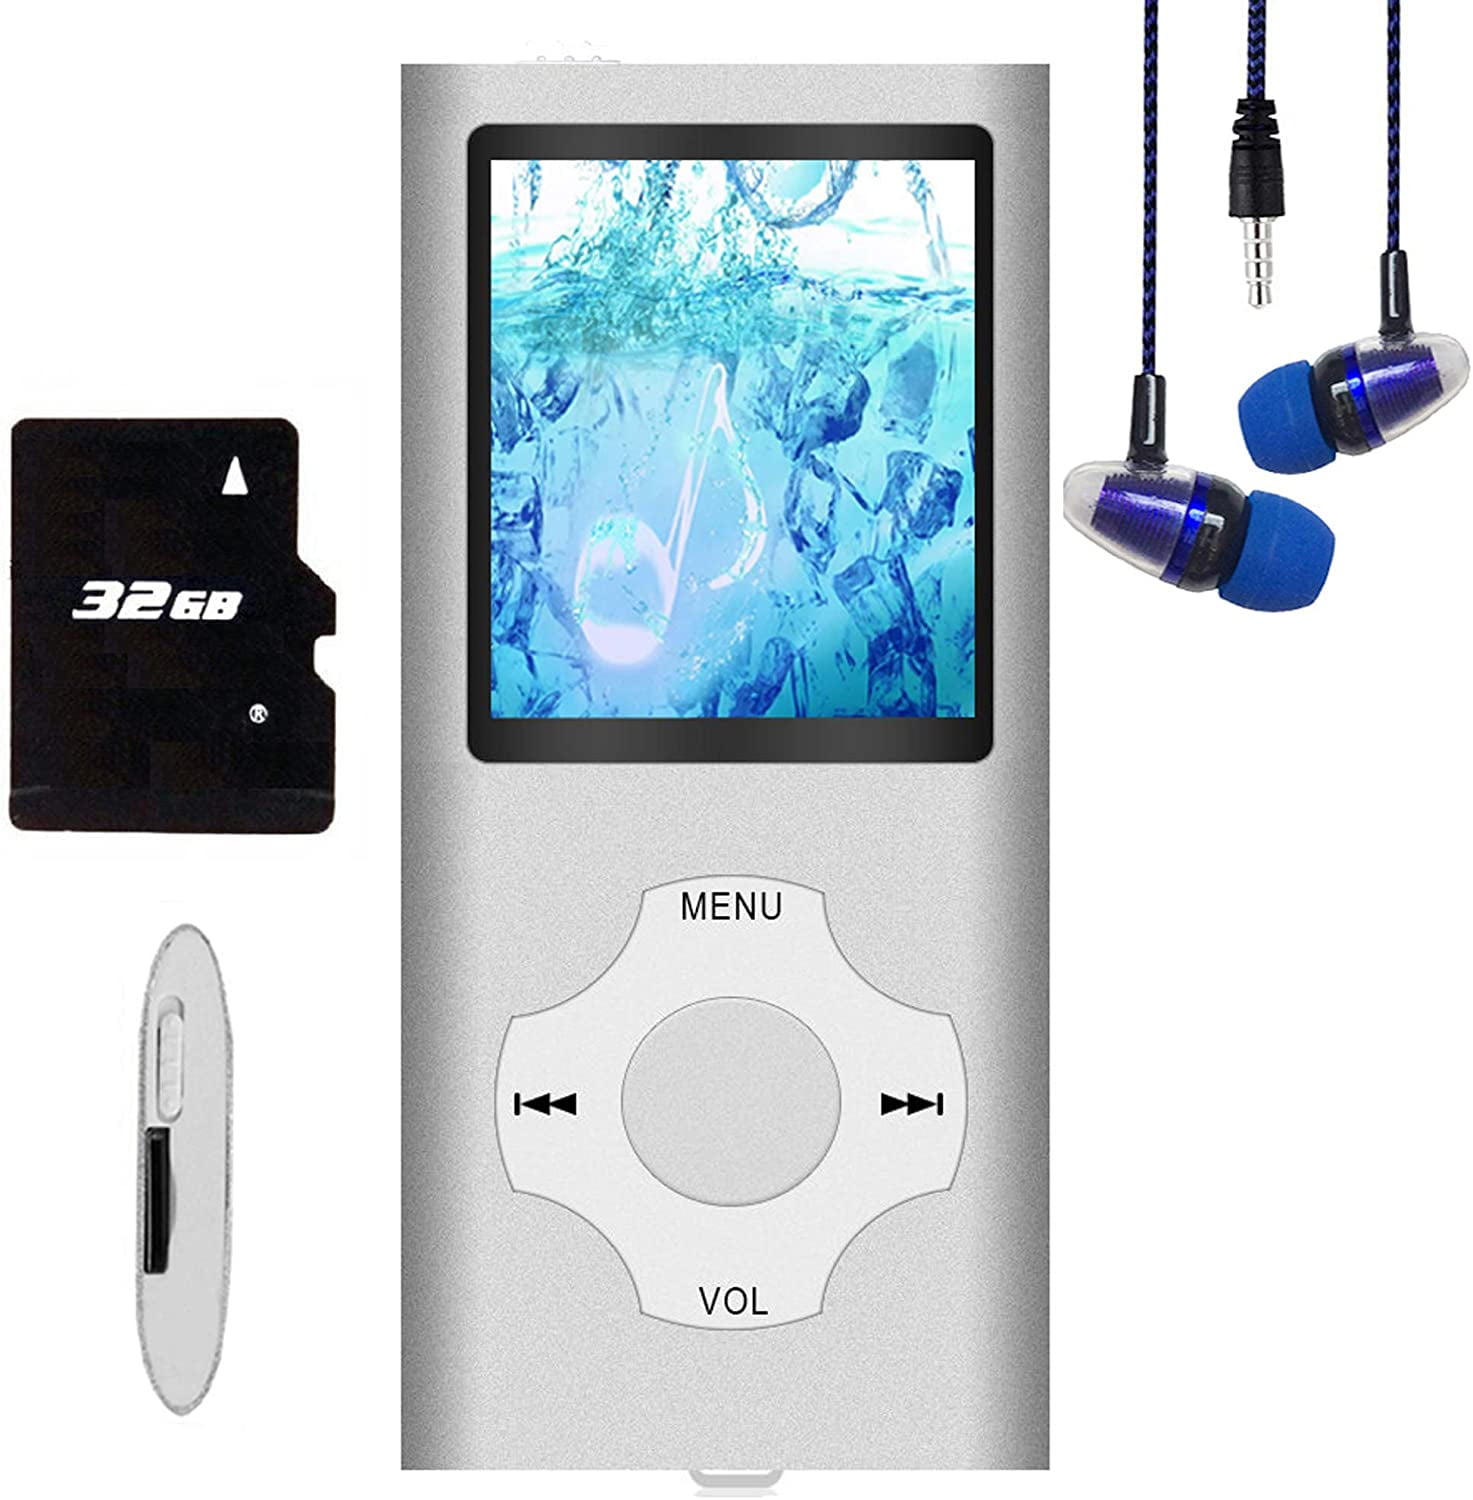 Voice Record Hotechs MP3 Music Player with 32GB Memory SD Card Slim Classic Digital LCD 1.82 Screen Mini USB Port with FM Radio MP3 Player MP4 Player 